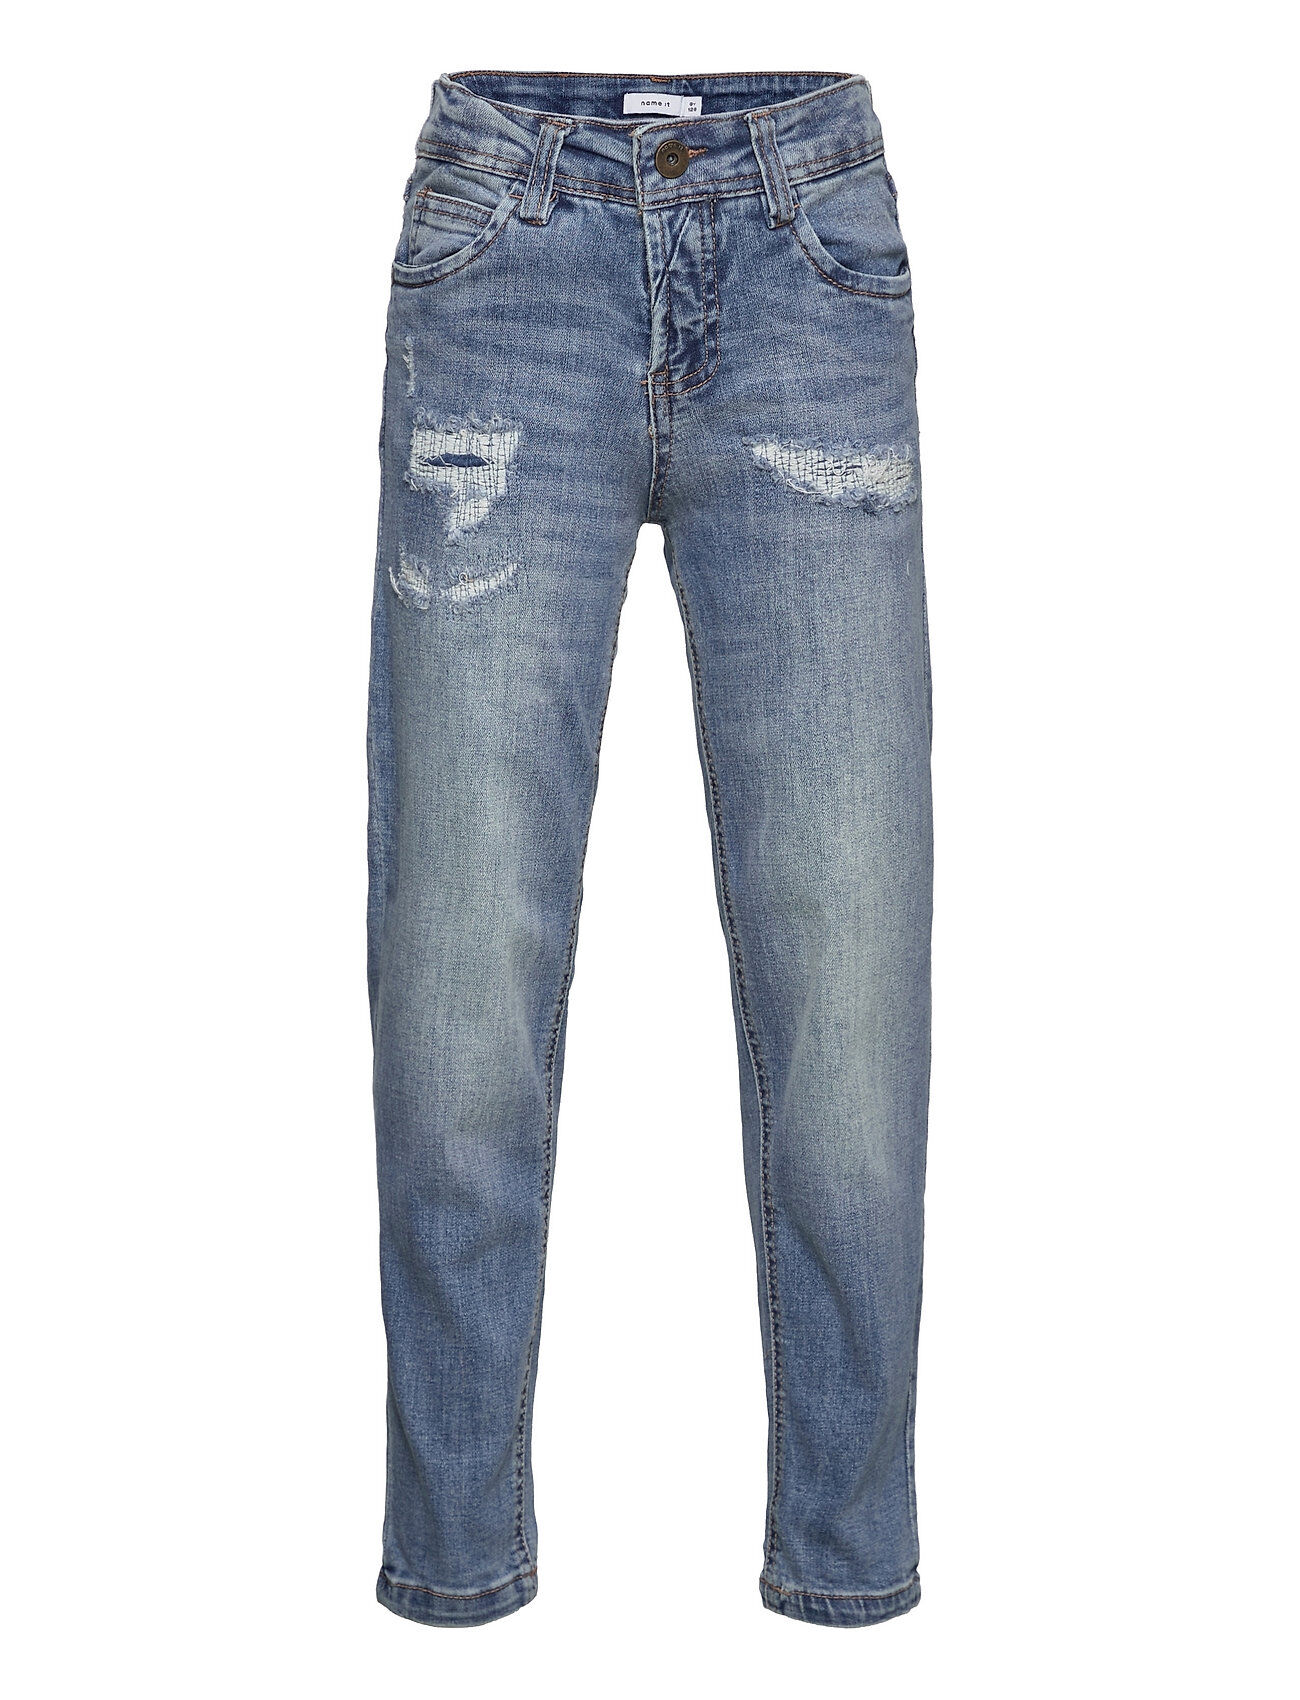 name it Nkmchris Dnmtardin 2625 Pant Jeans Straight Jeans Blå Name It